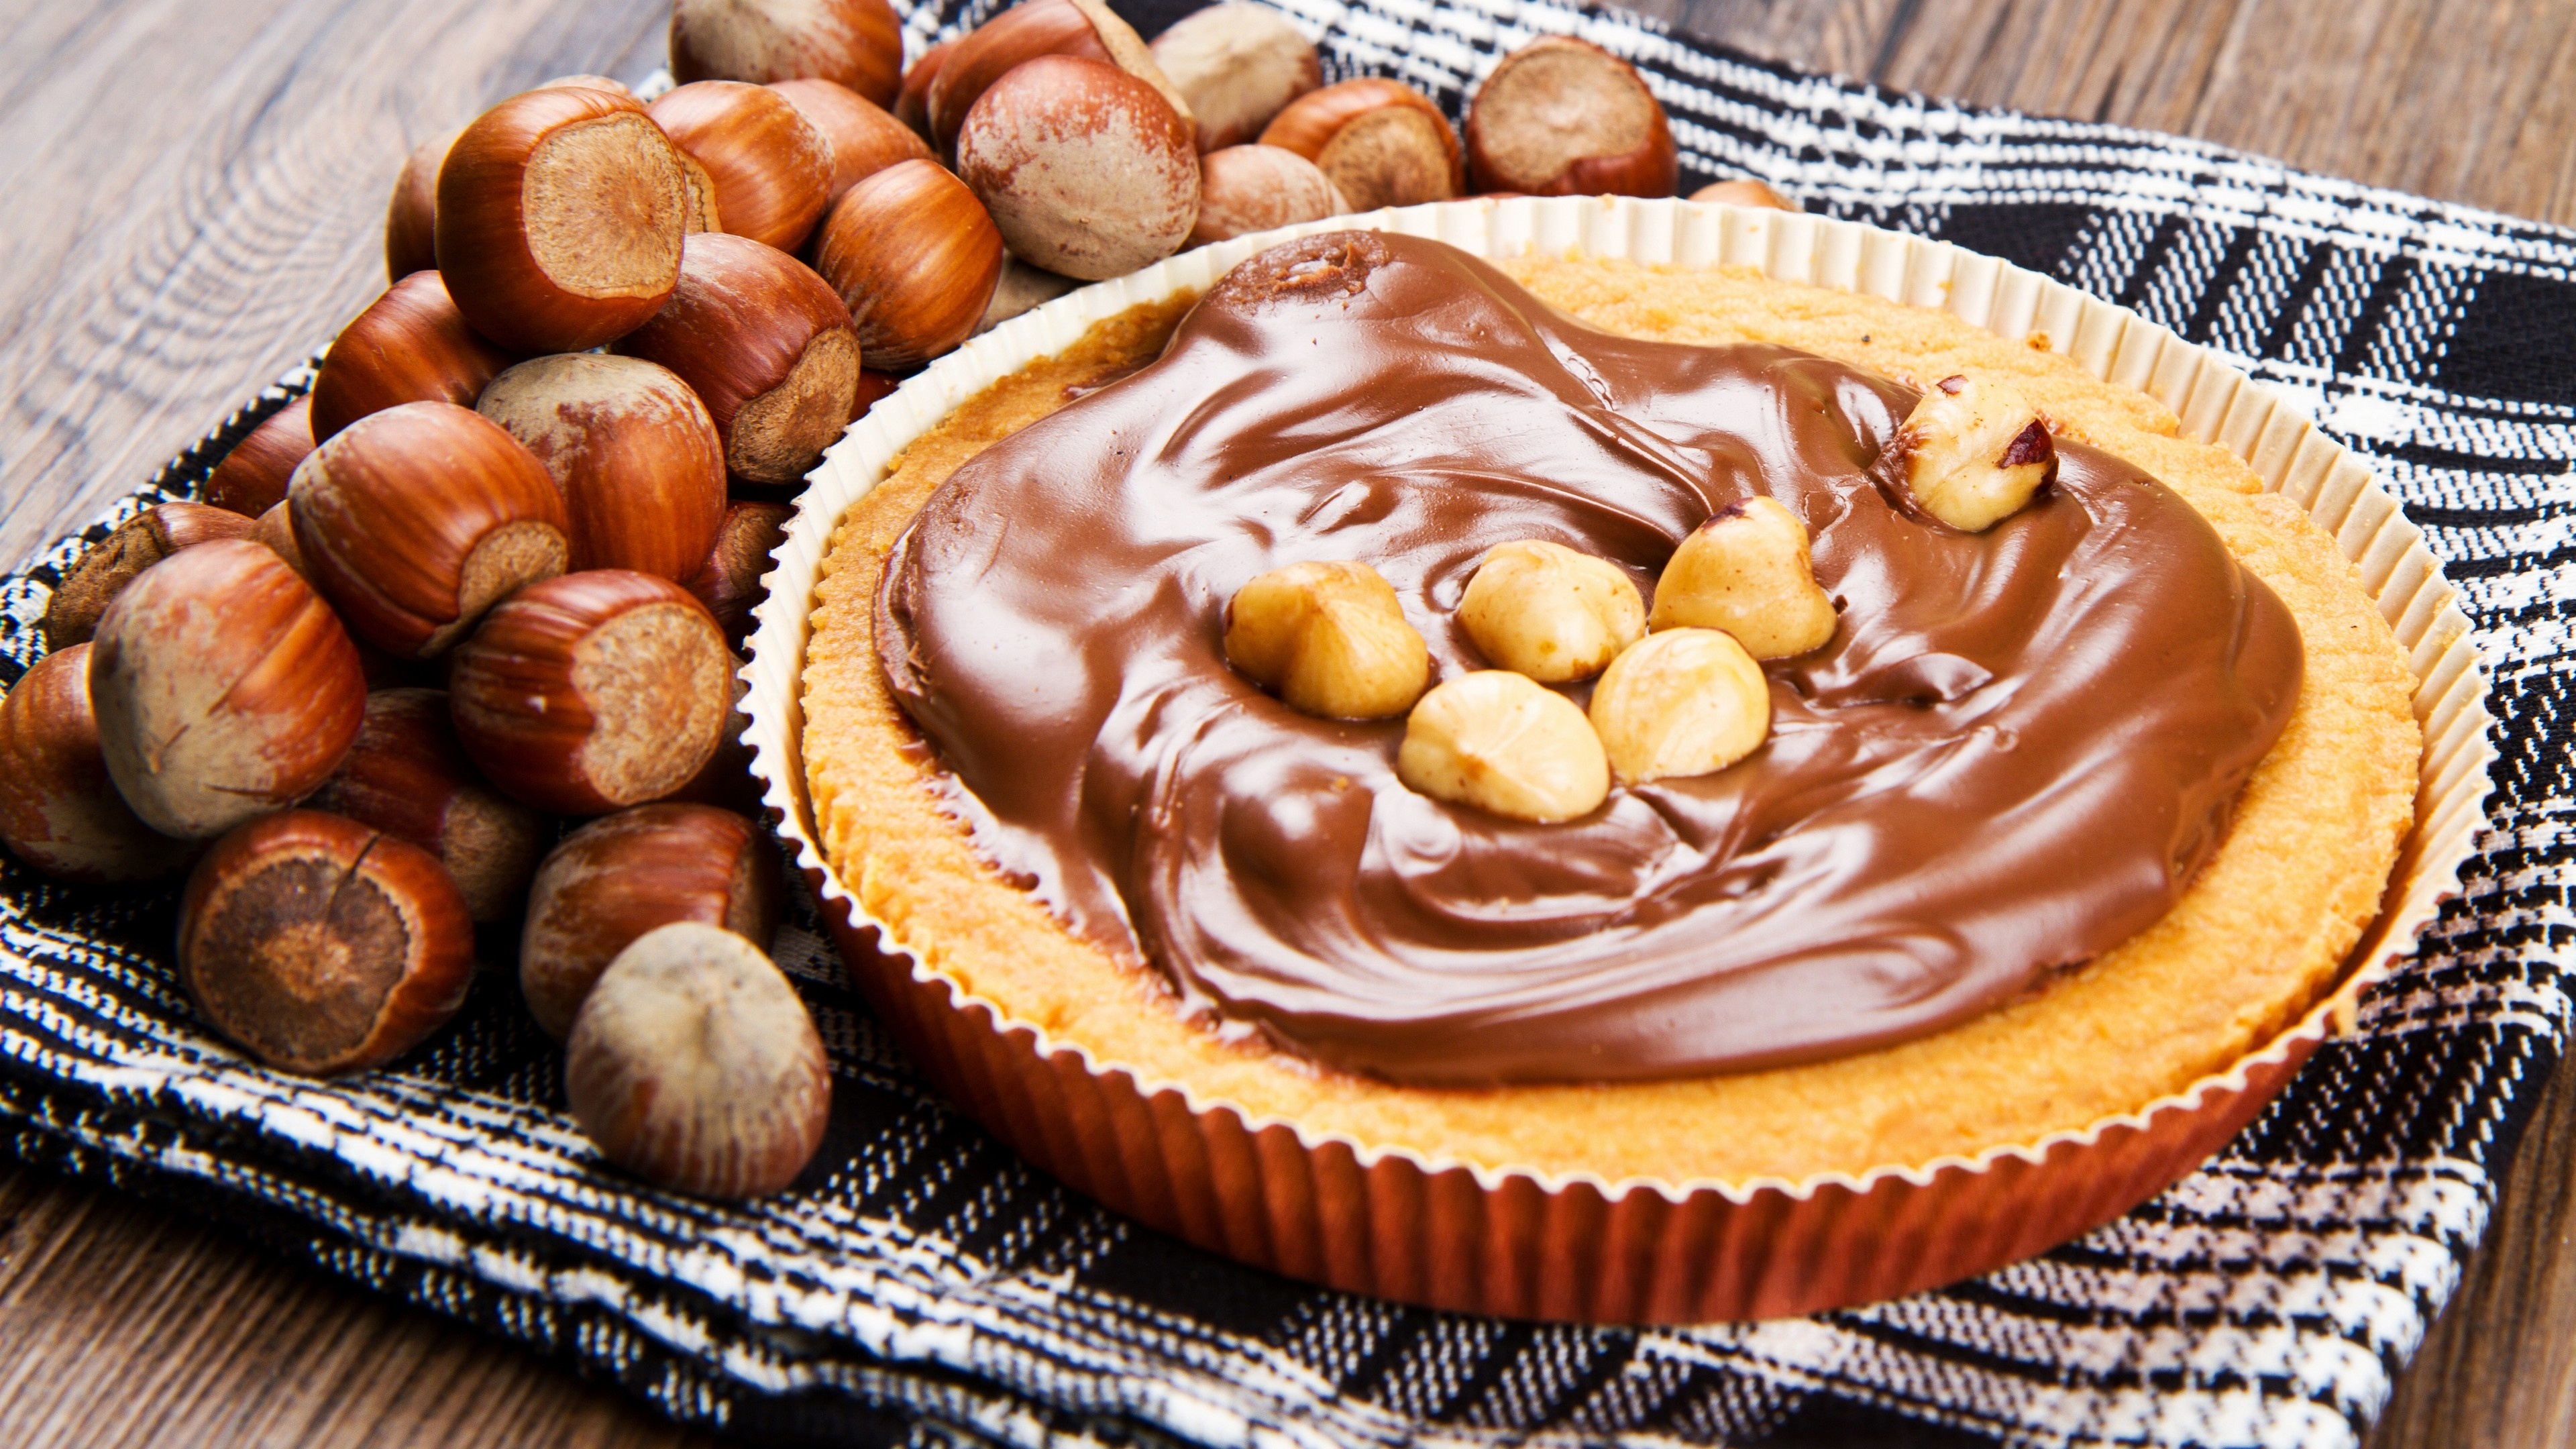 Hazelnuts: Its trees can produce until over 100 years of age, Nutella. 3840x2160 4K Wallpaper.